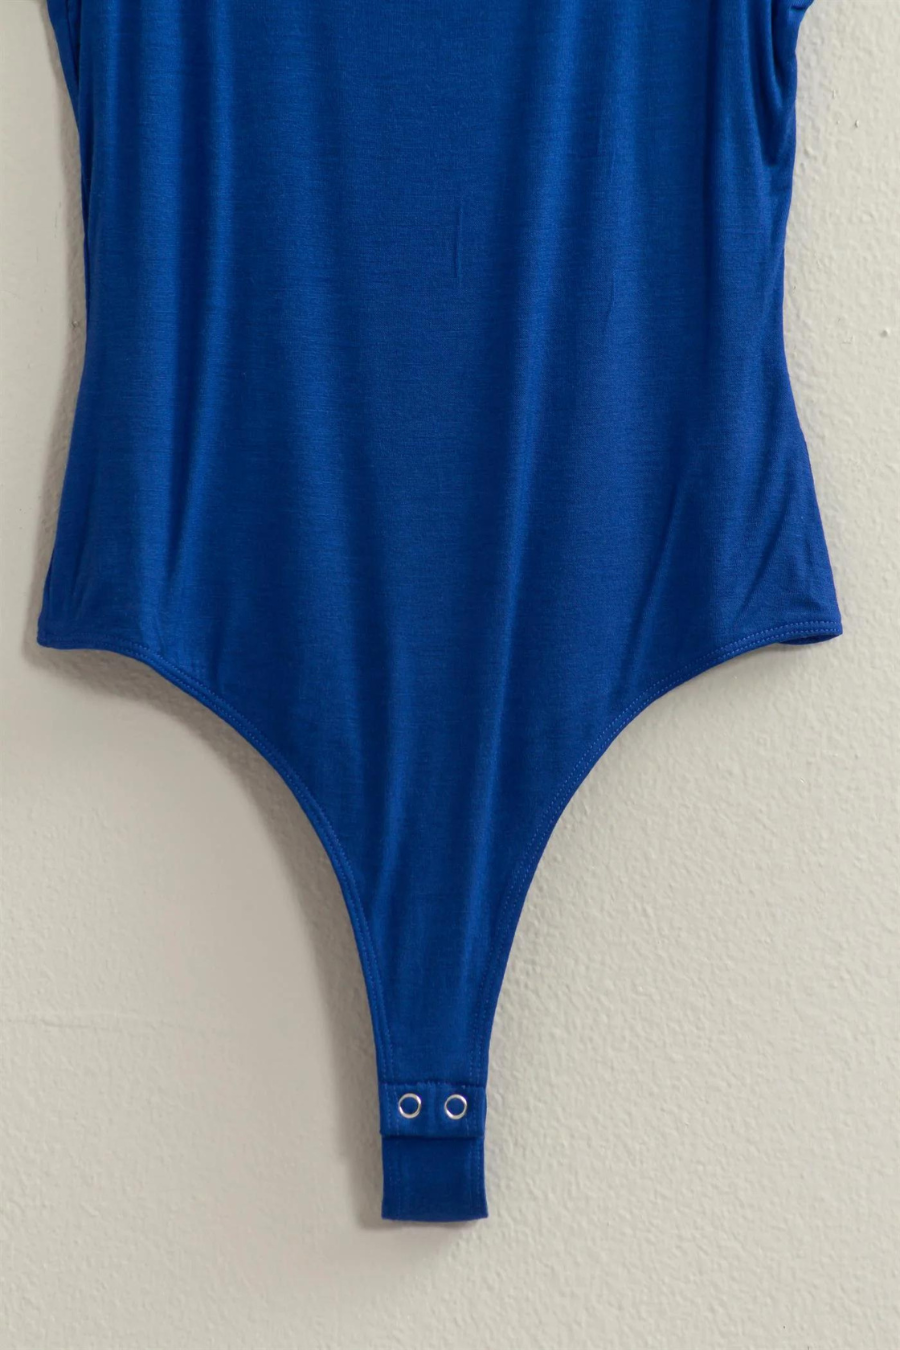 close up of snap closure for the Brinkley body suit, shown in the color blue